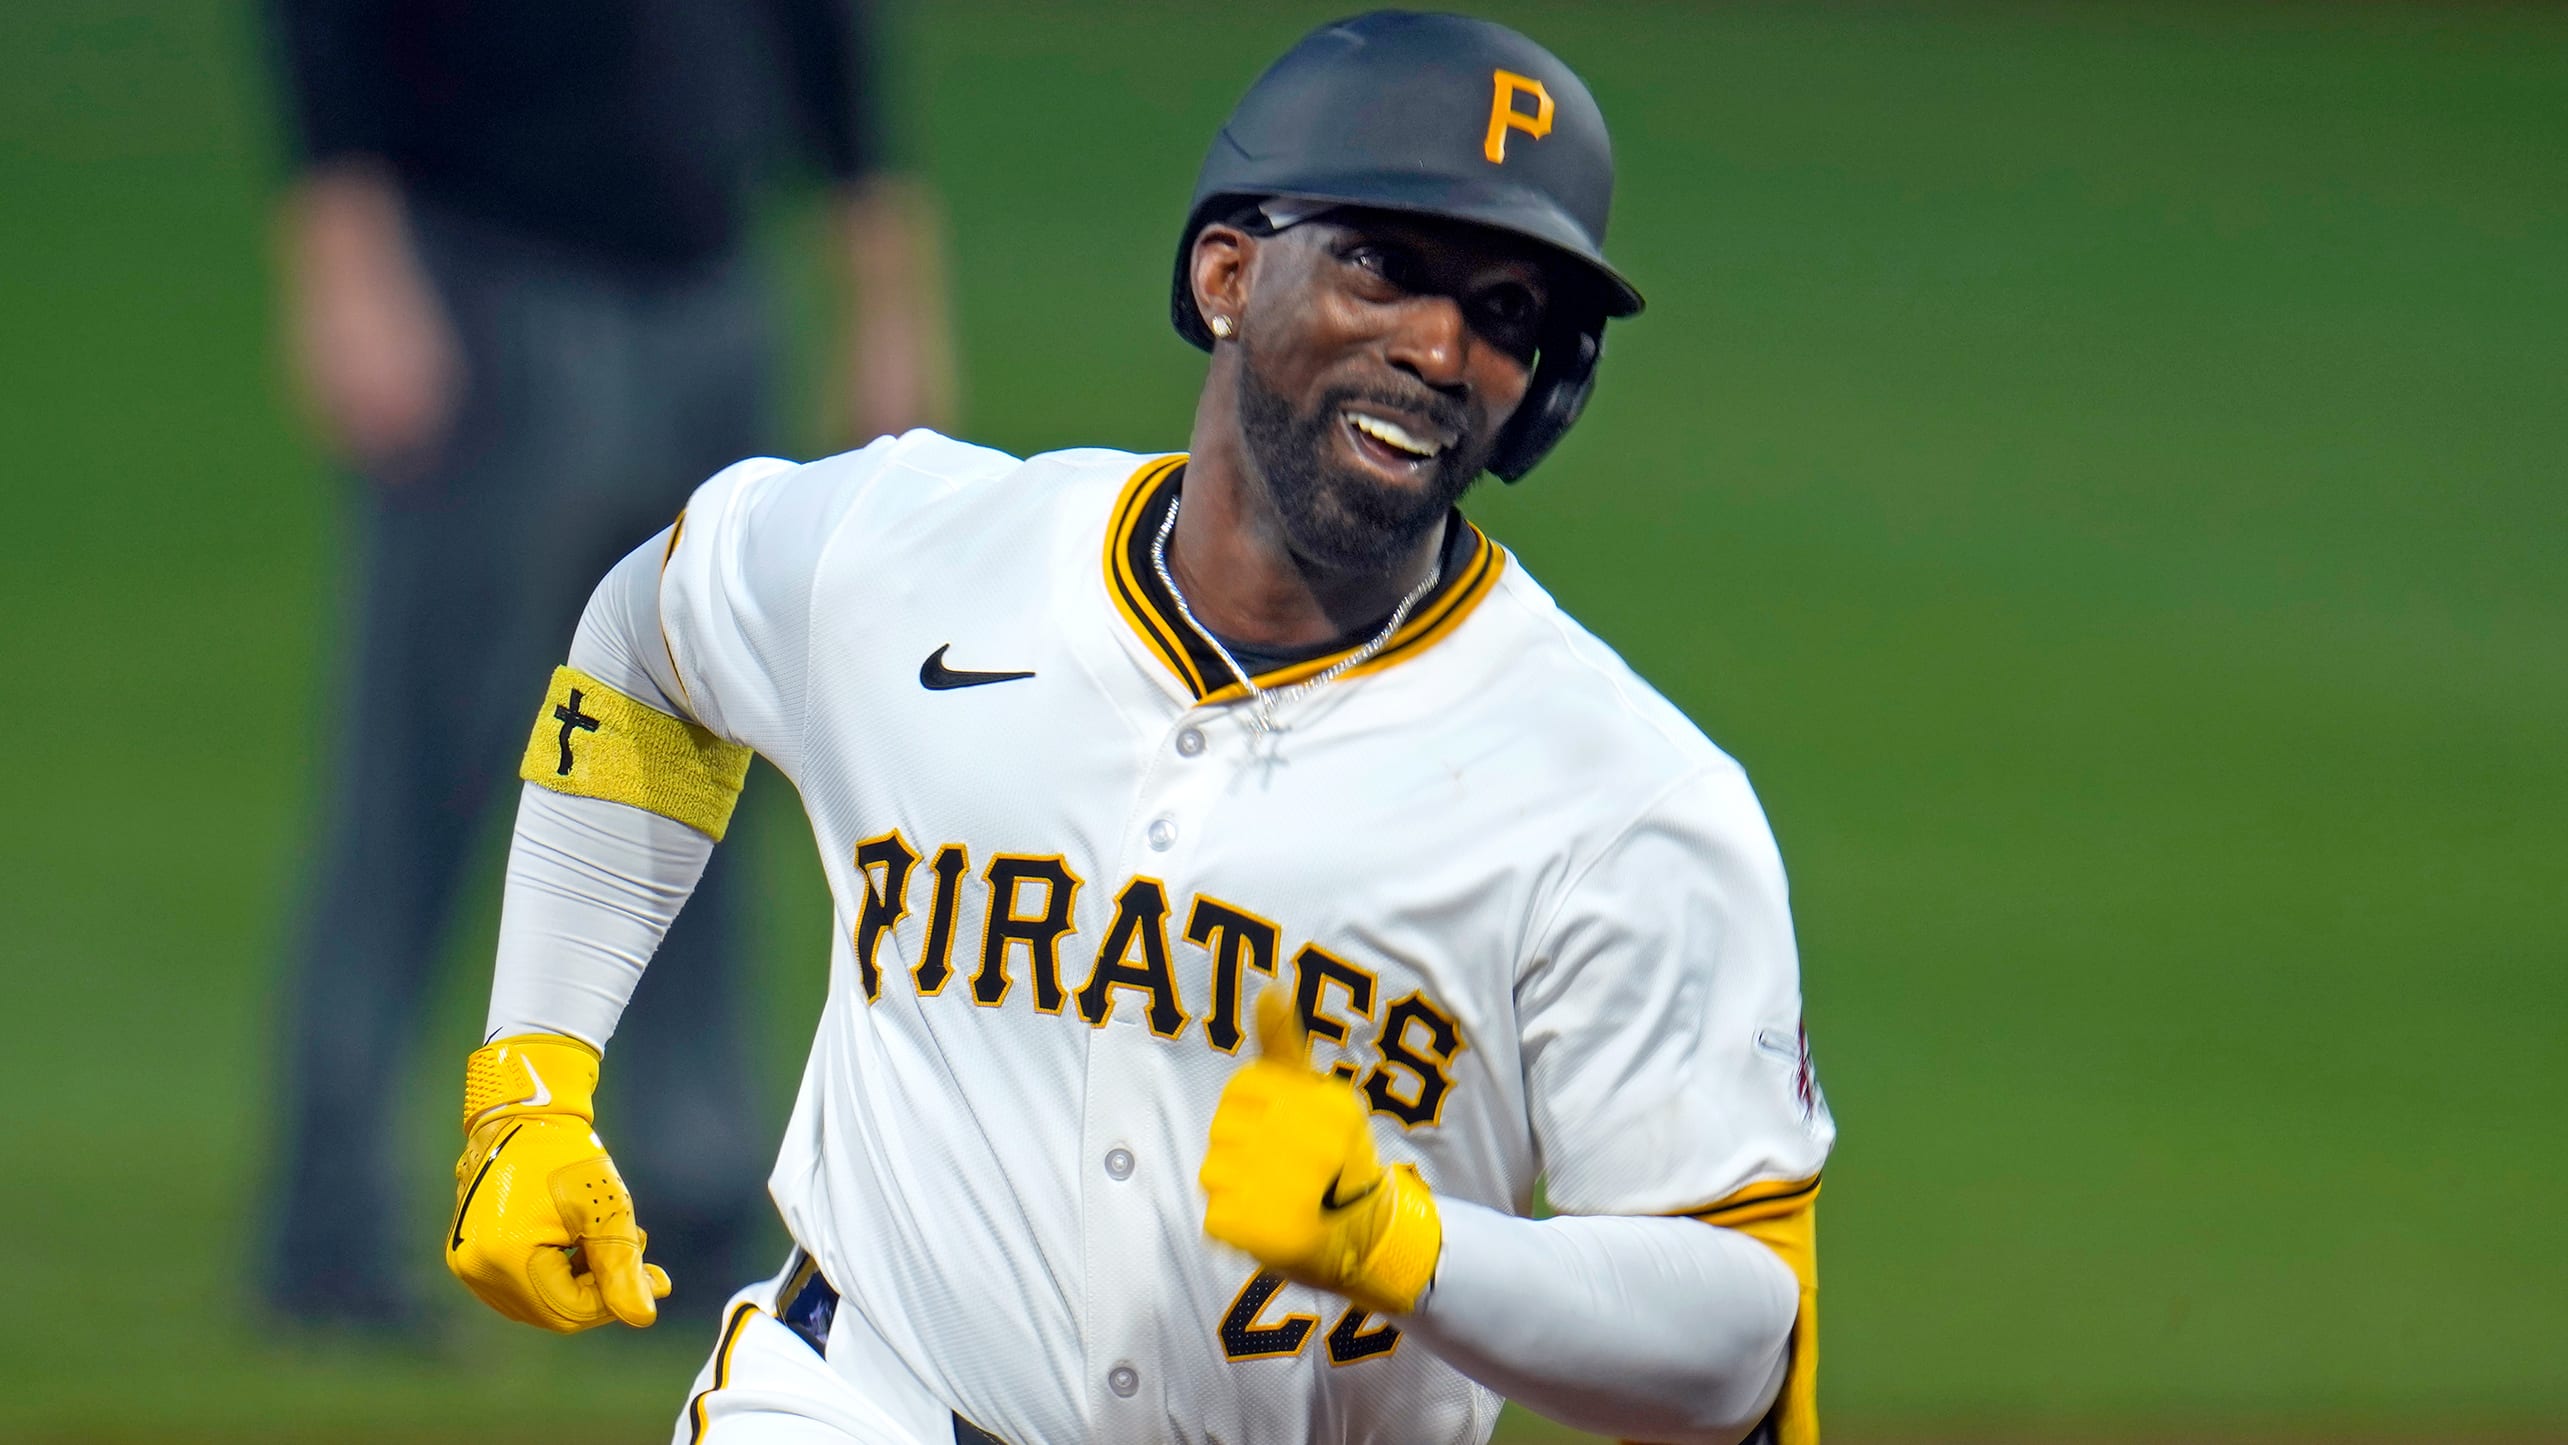 Andrew McCutchen rounds the bases after a home run